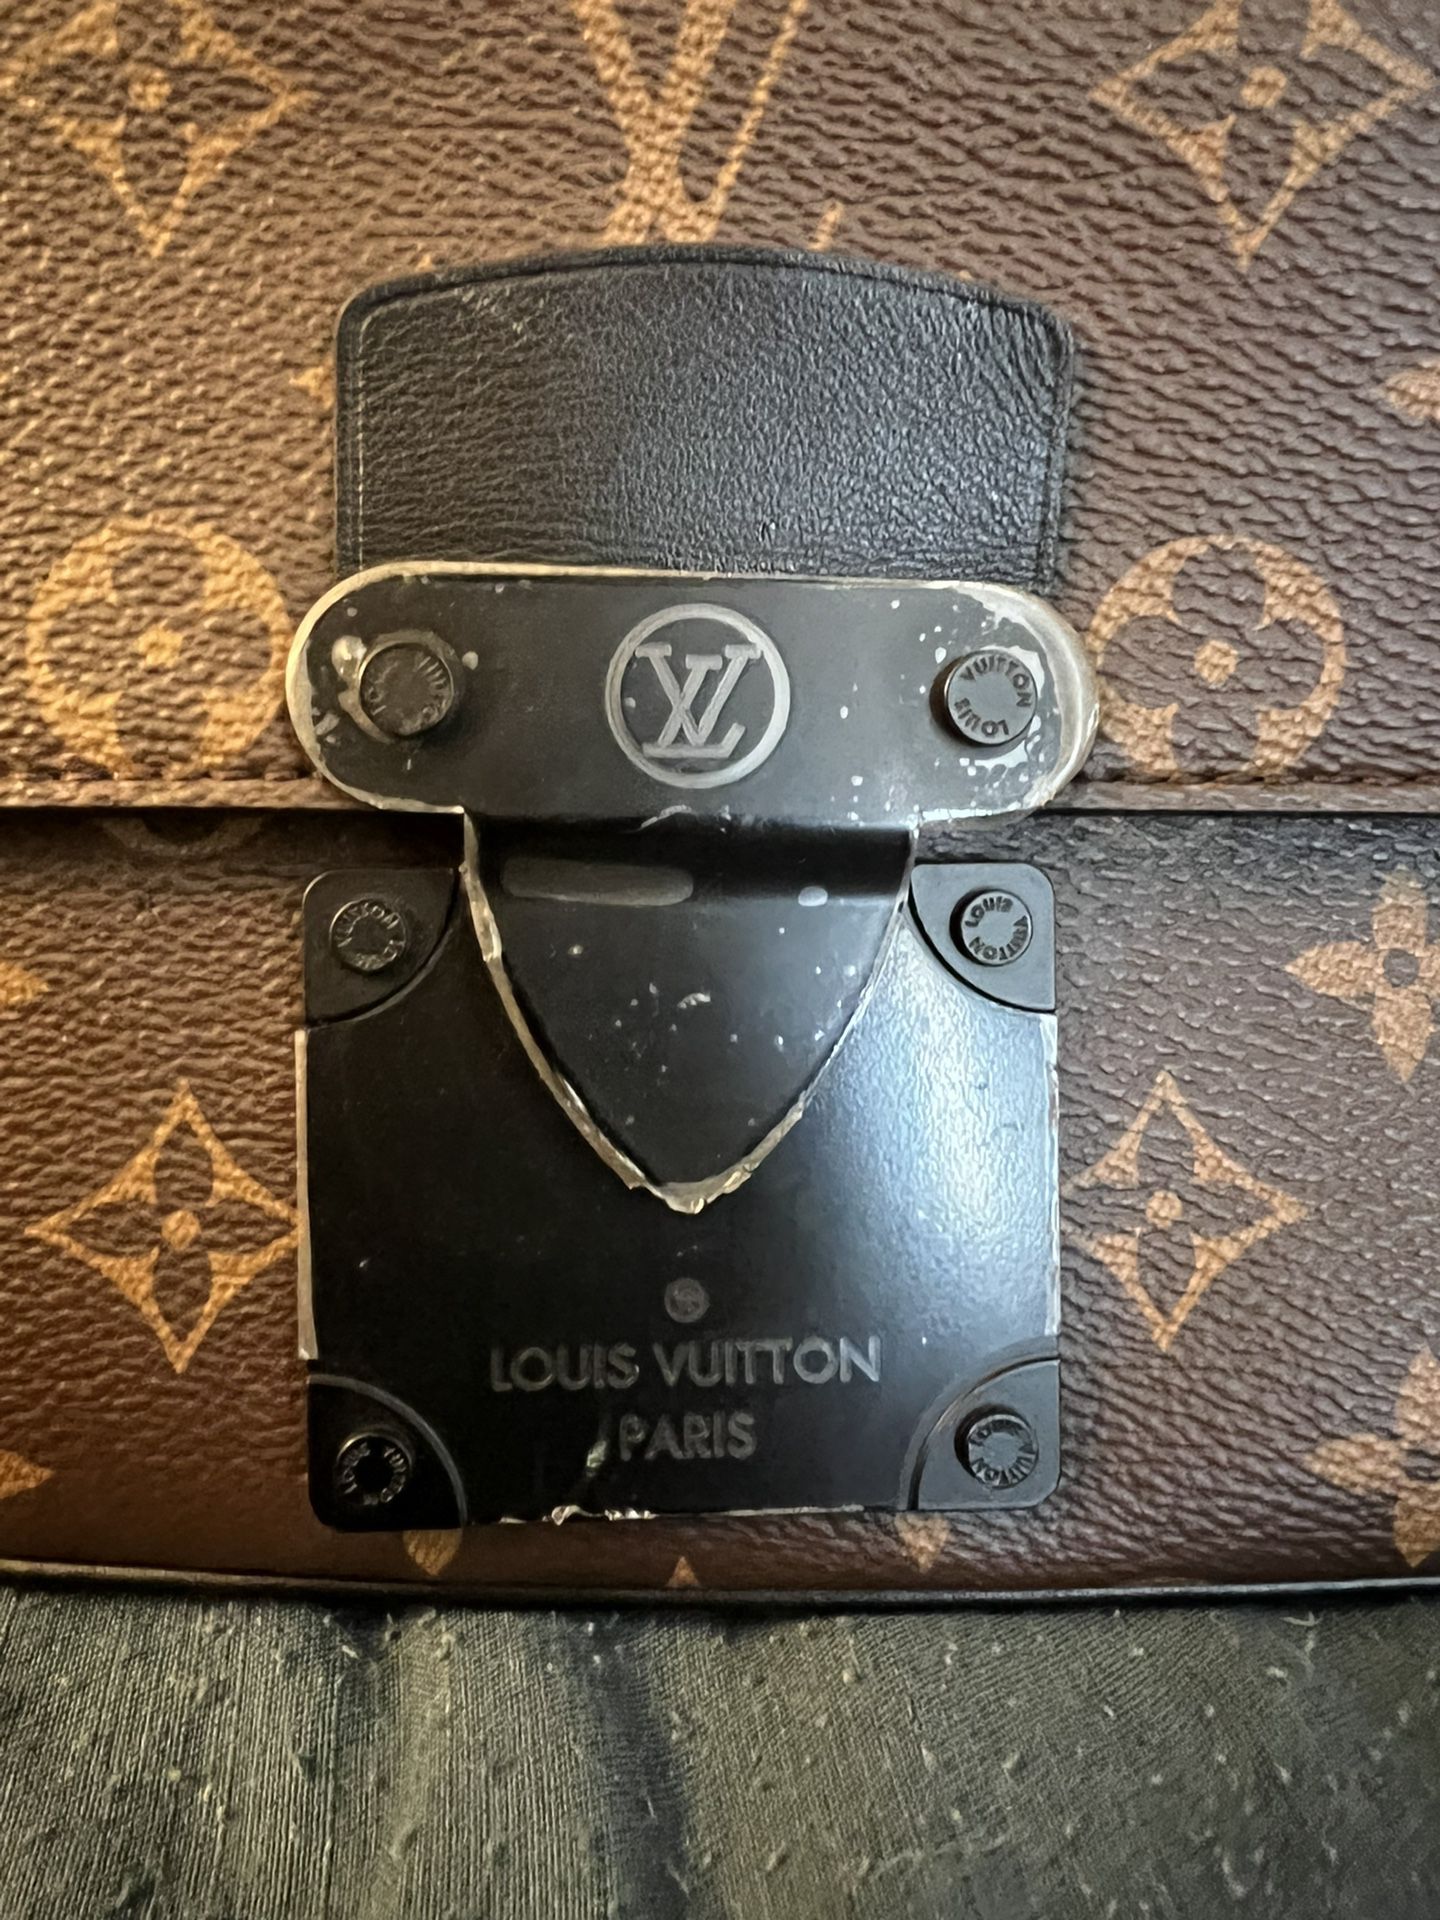 LOUIS VUITTON S LOCK SLING BAG for Sale in Irvine, CA - OfferUp